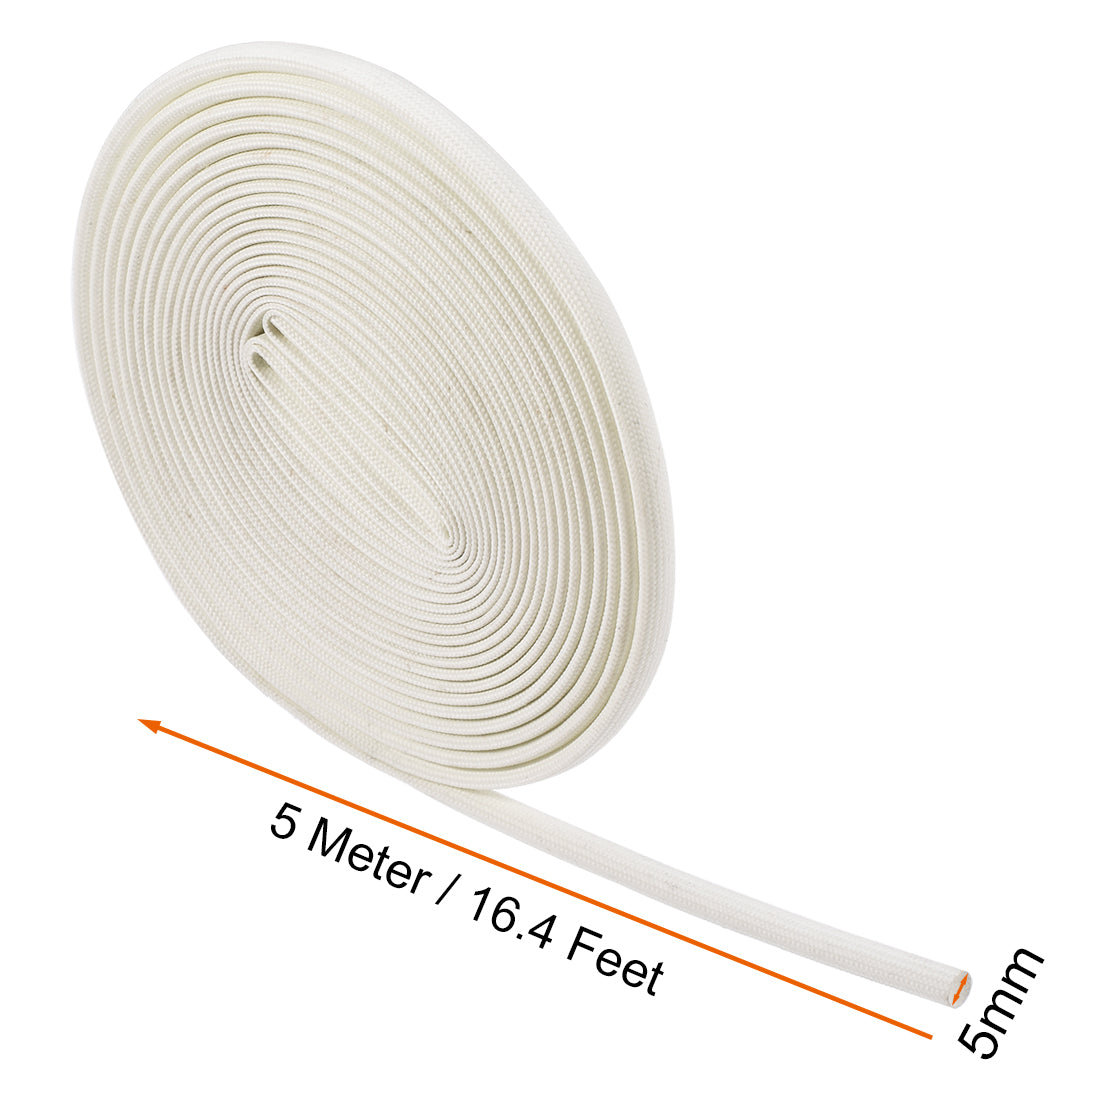 uxcell Uxcell Insulation Cable Protector,16.4Ft-5mm High TEMP Silicone Fiberglass Sleeve White